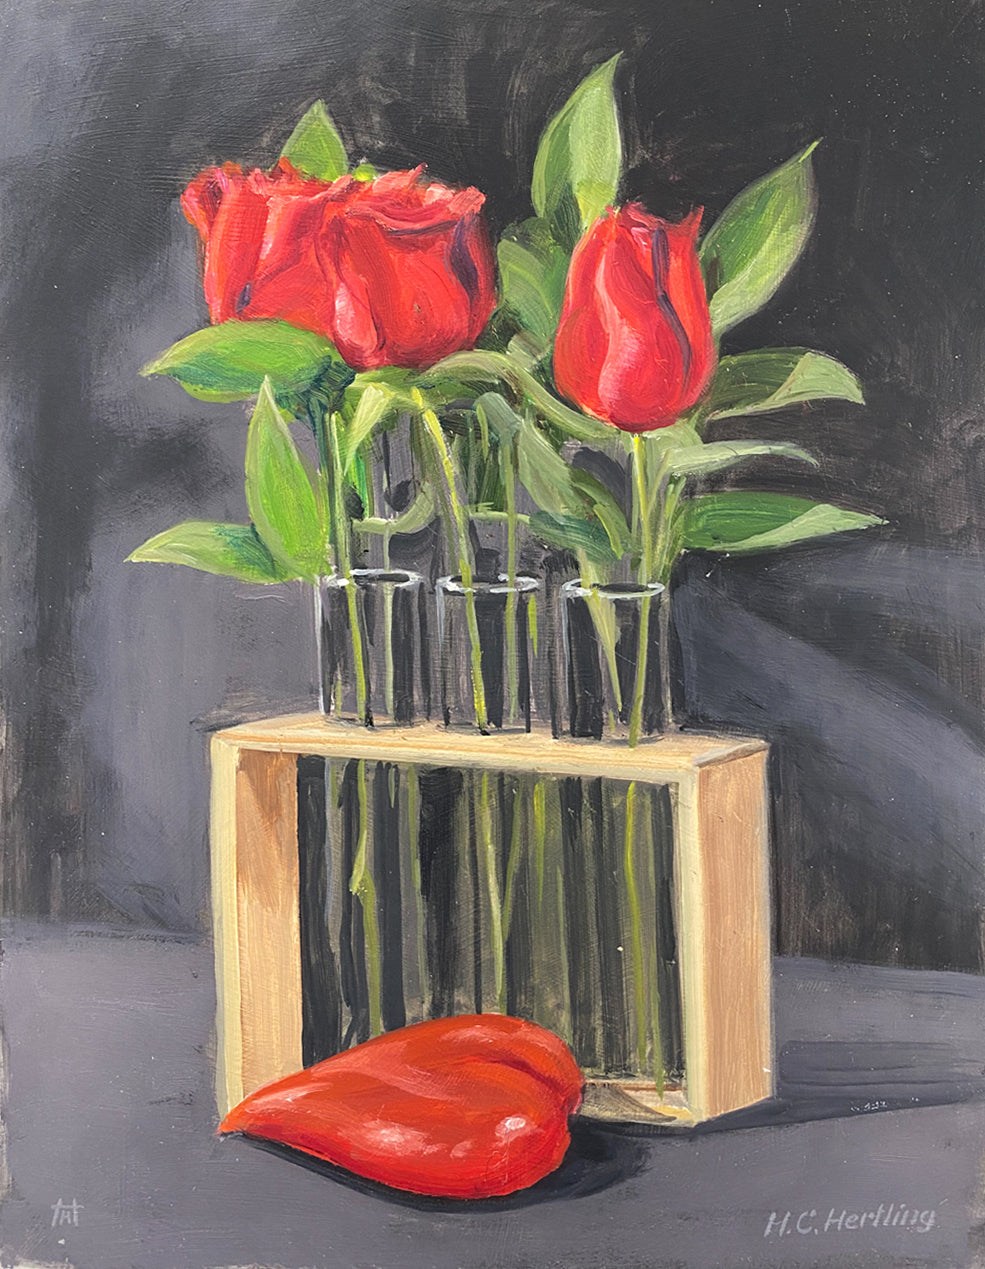 Red Roses. Still life painting by Heiner Hertling.  Oil on board.  